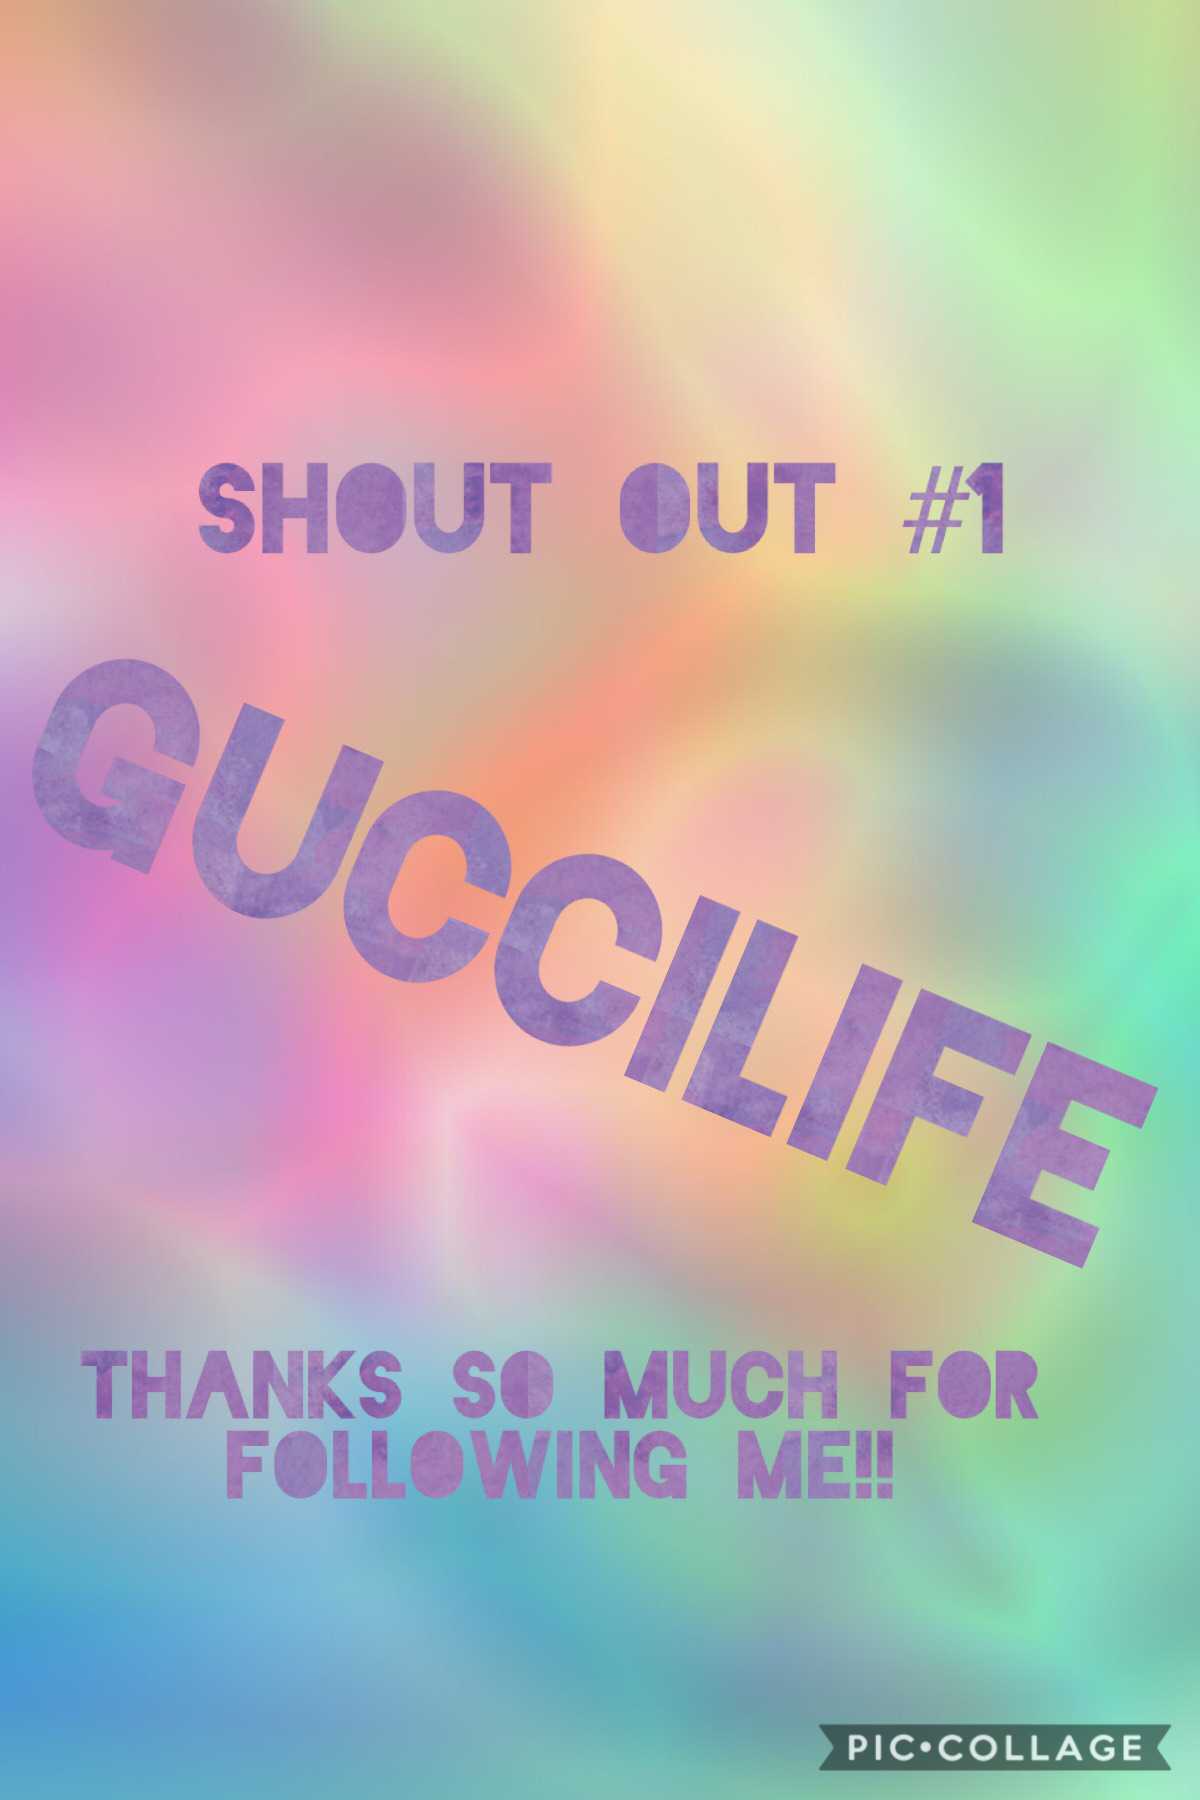 Thanks guccilife
Follow me for a shout out or follower of the week